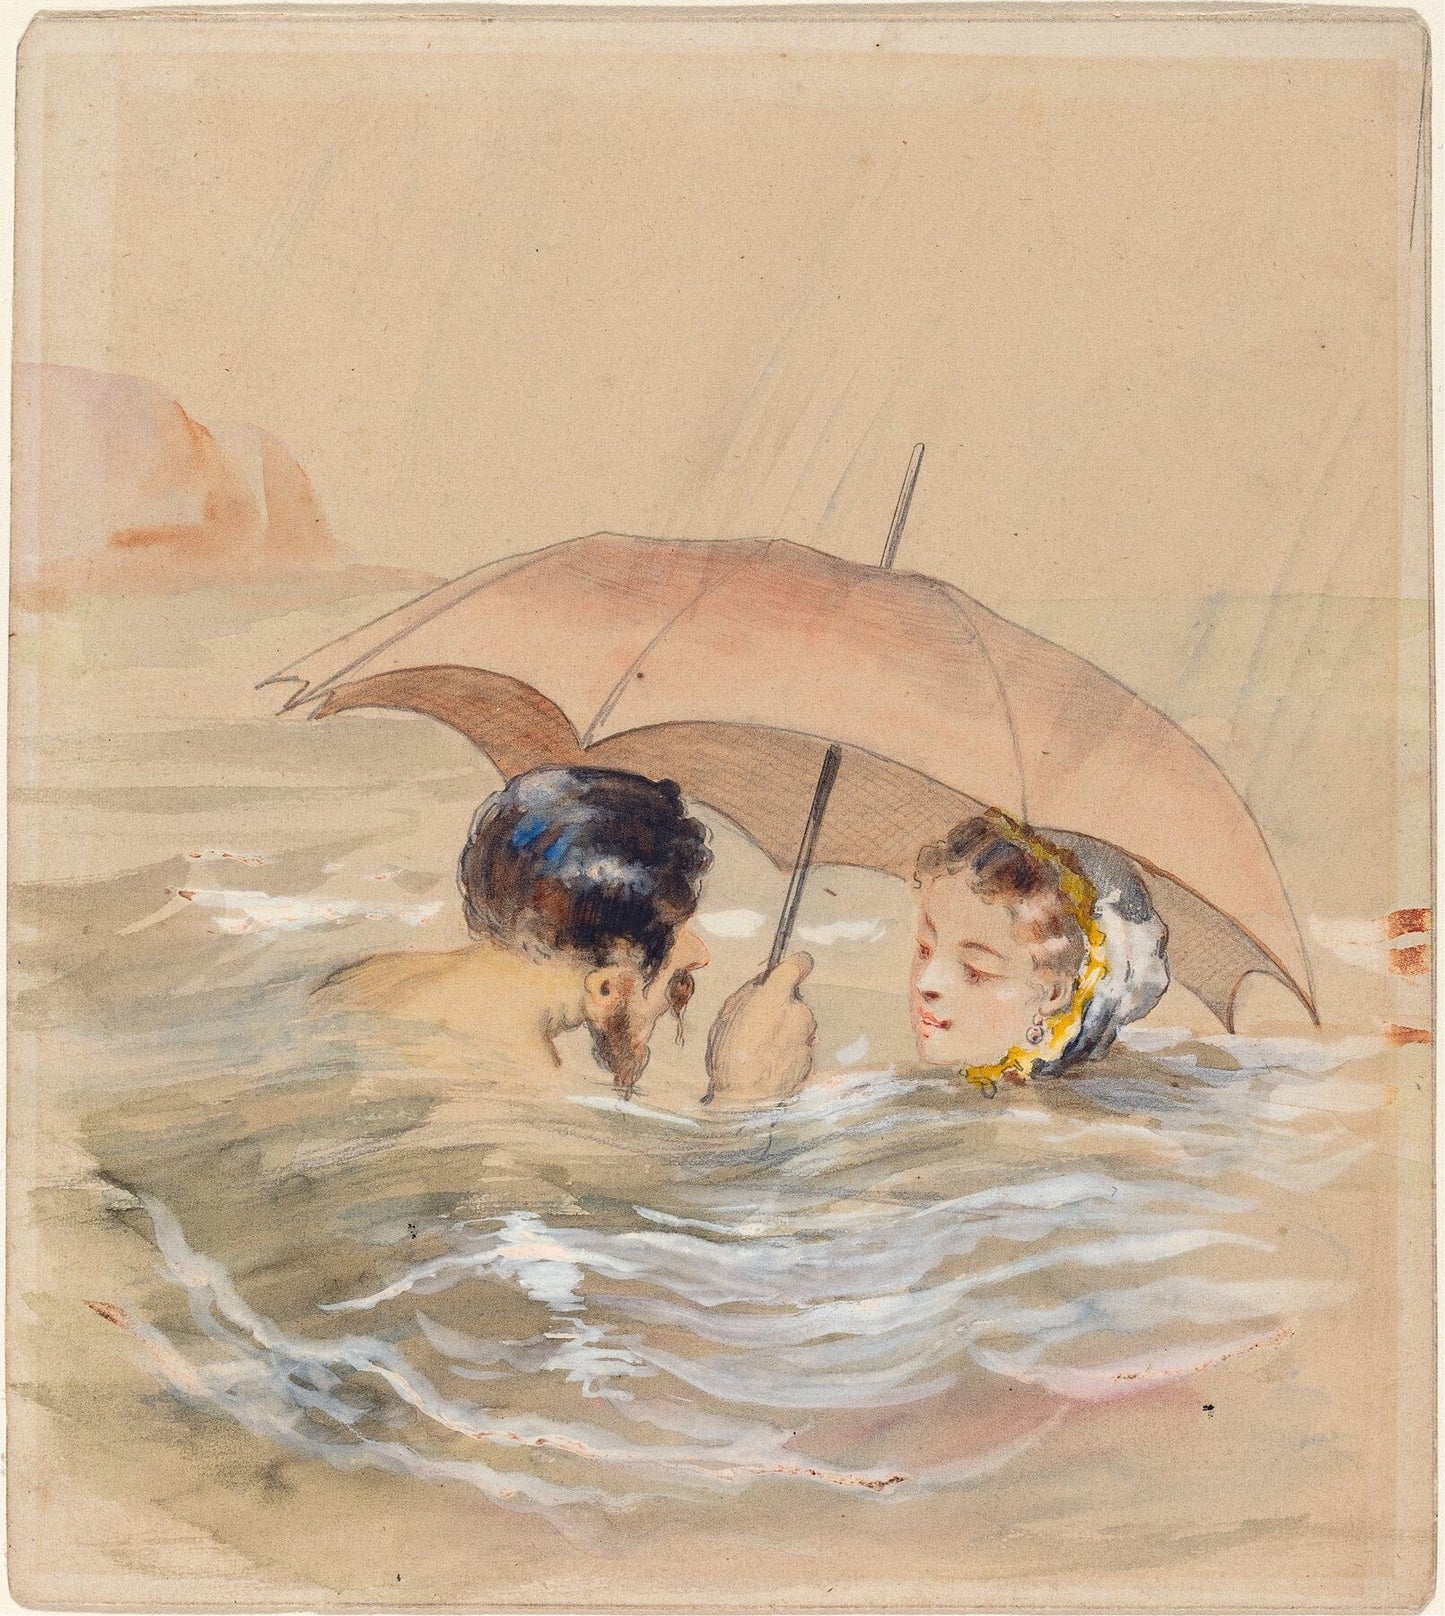 Bathing couple with umbrella (1800s) | Vintage bathroom prints | Alfred Grevin Posters, Prints, & Visual Artwork The Trumpet Shop   